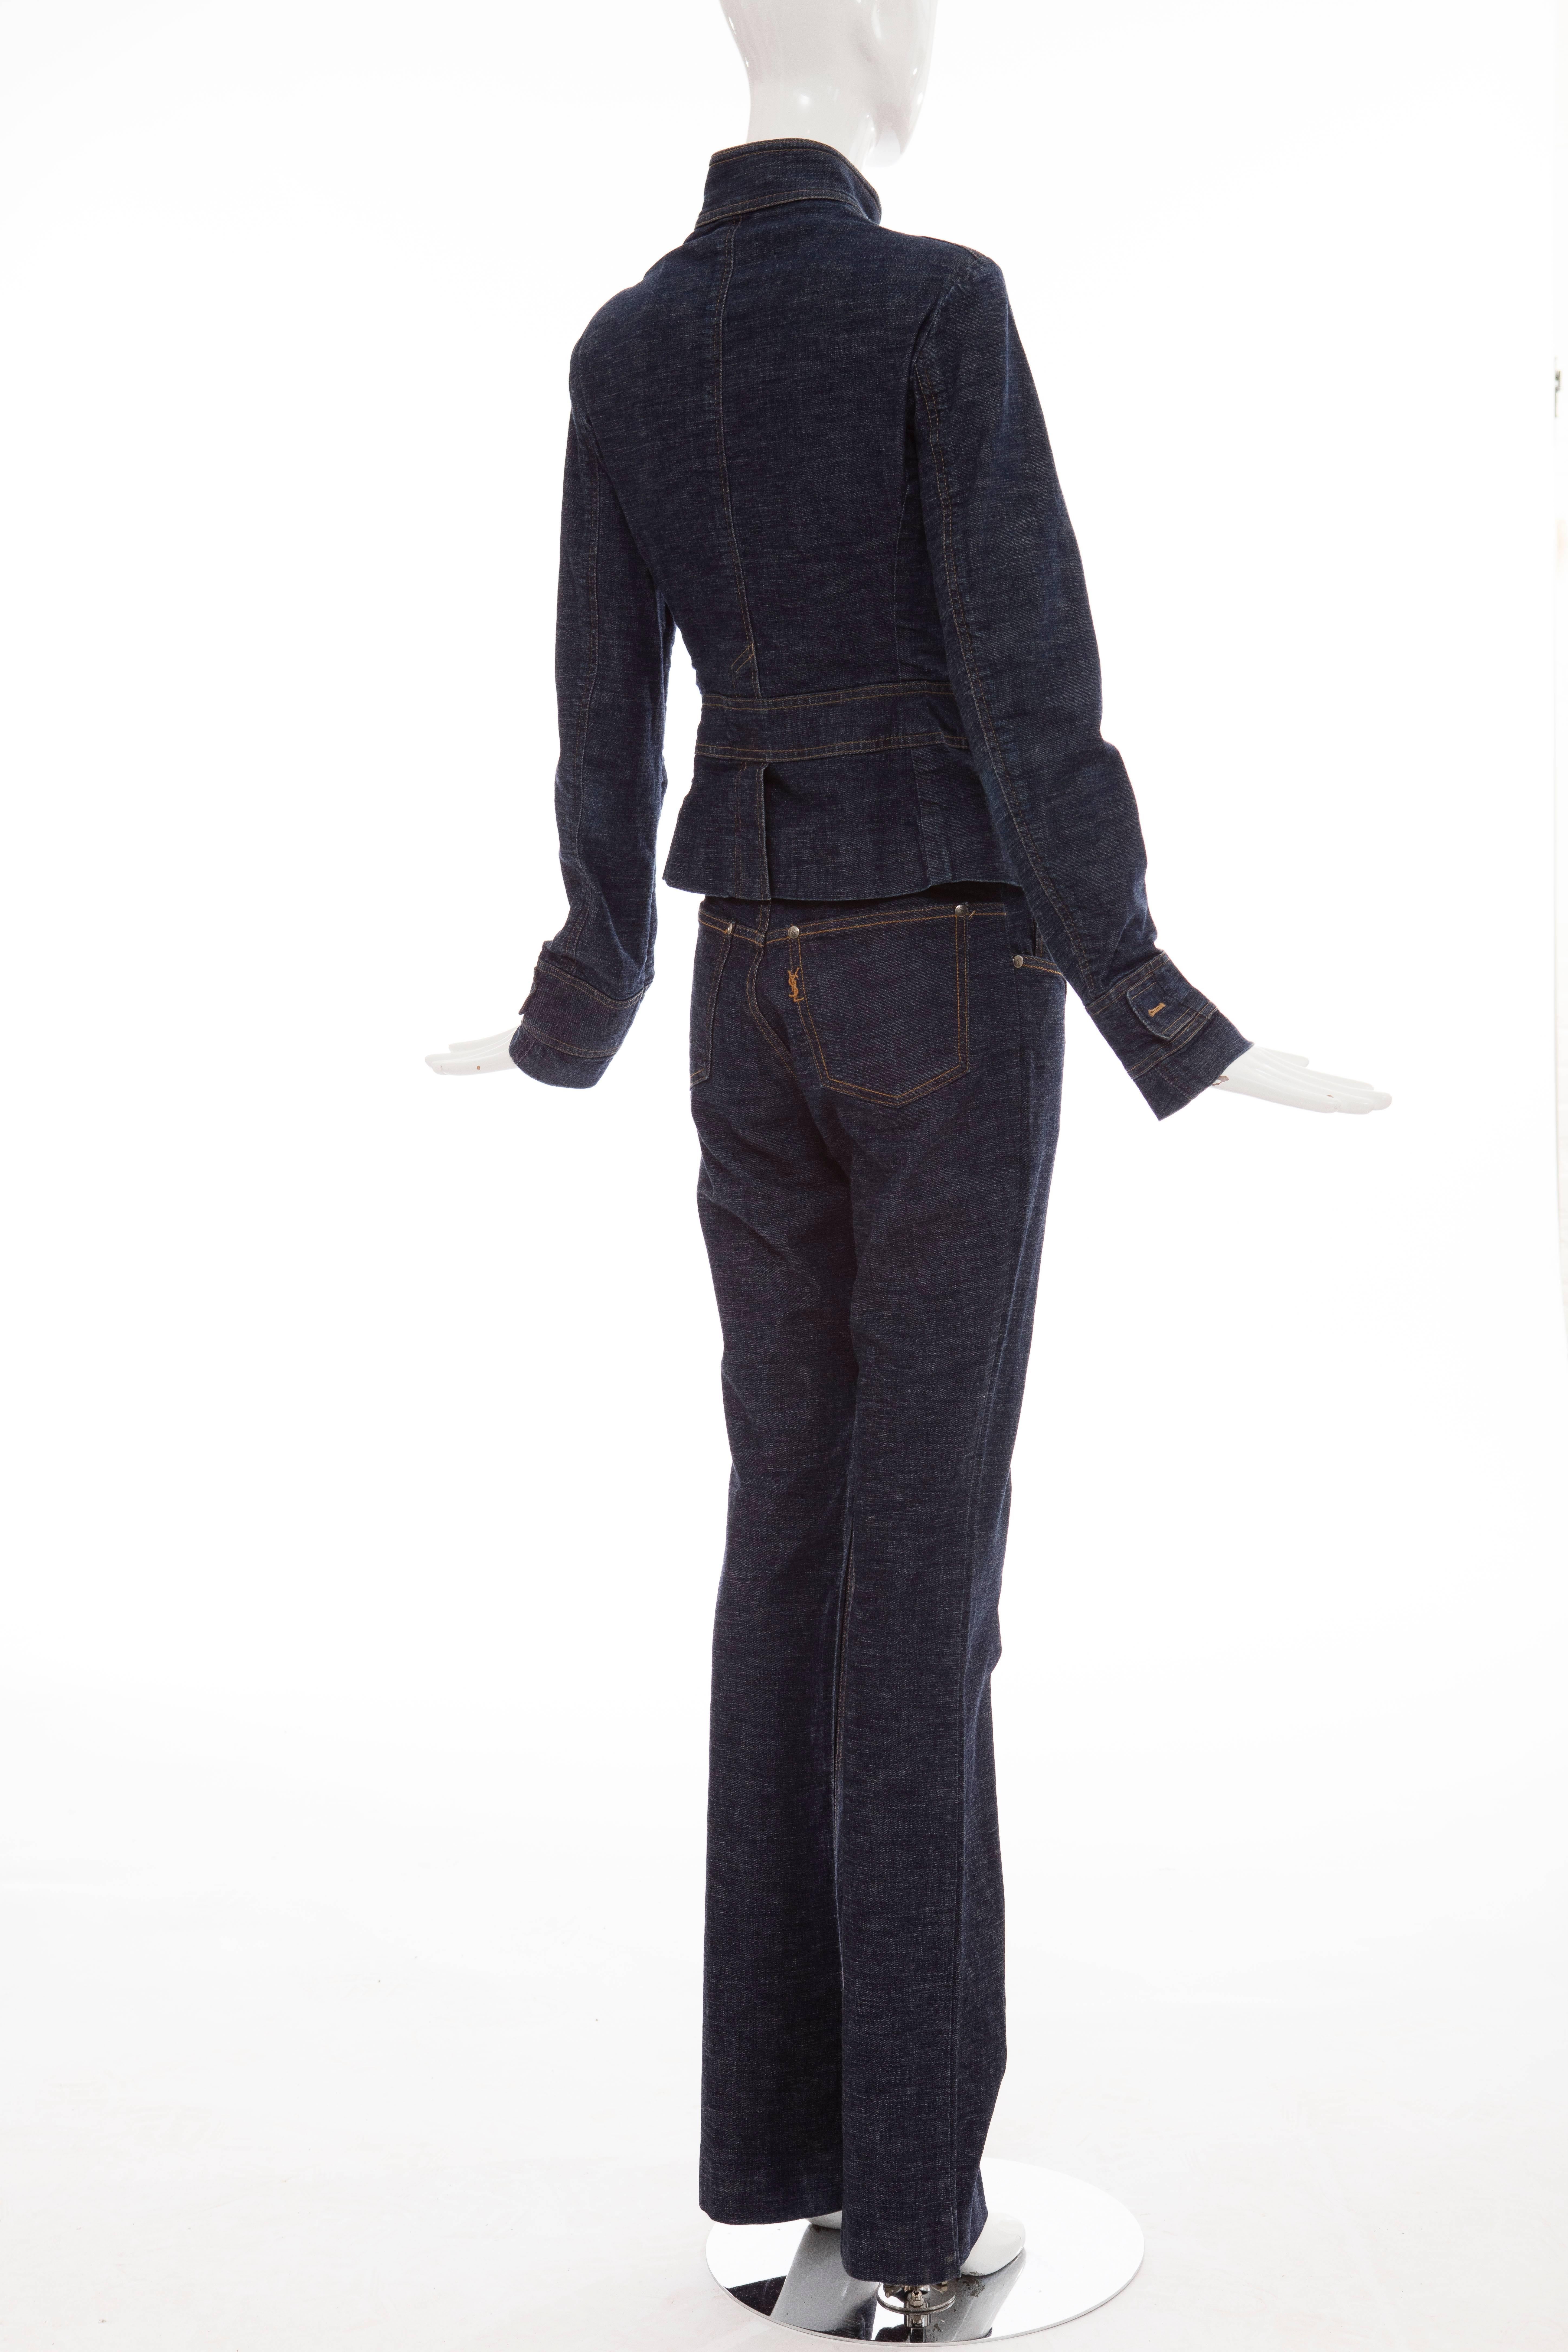 Tom Ford For Yves Saint Laurent Denim Pant Suit, Circa 2003  In Excellent Condition For Sale In Cincinnati, OH